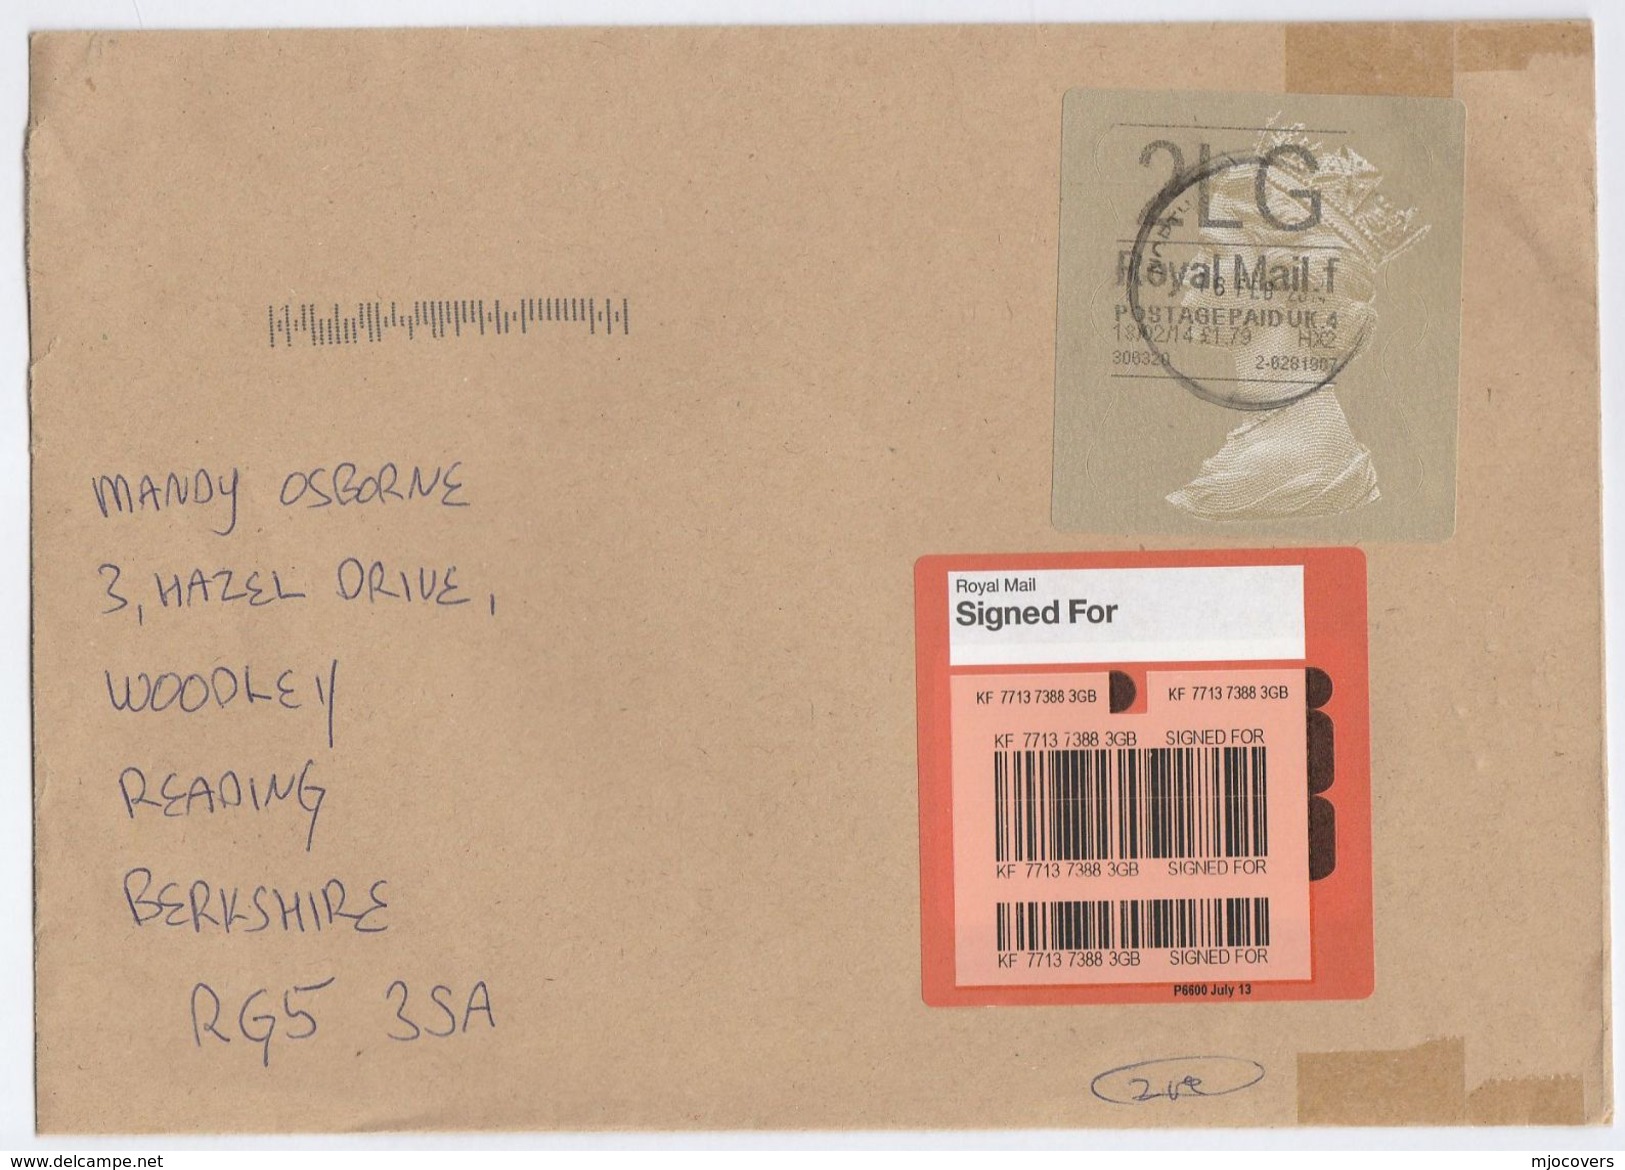 2014 GB ROYAL MAIL SIGNED FOR COVER Franked  2LG POSTAGE PAID UK 4 HX2 ROYAL MAIL F LABEL Stamps - Covers & Documents